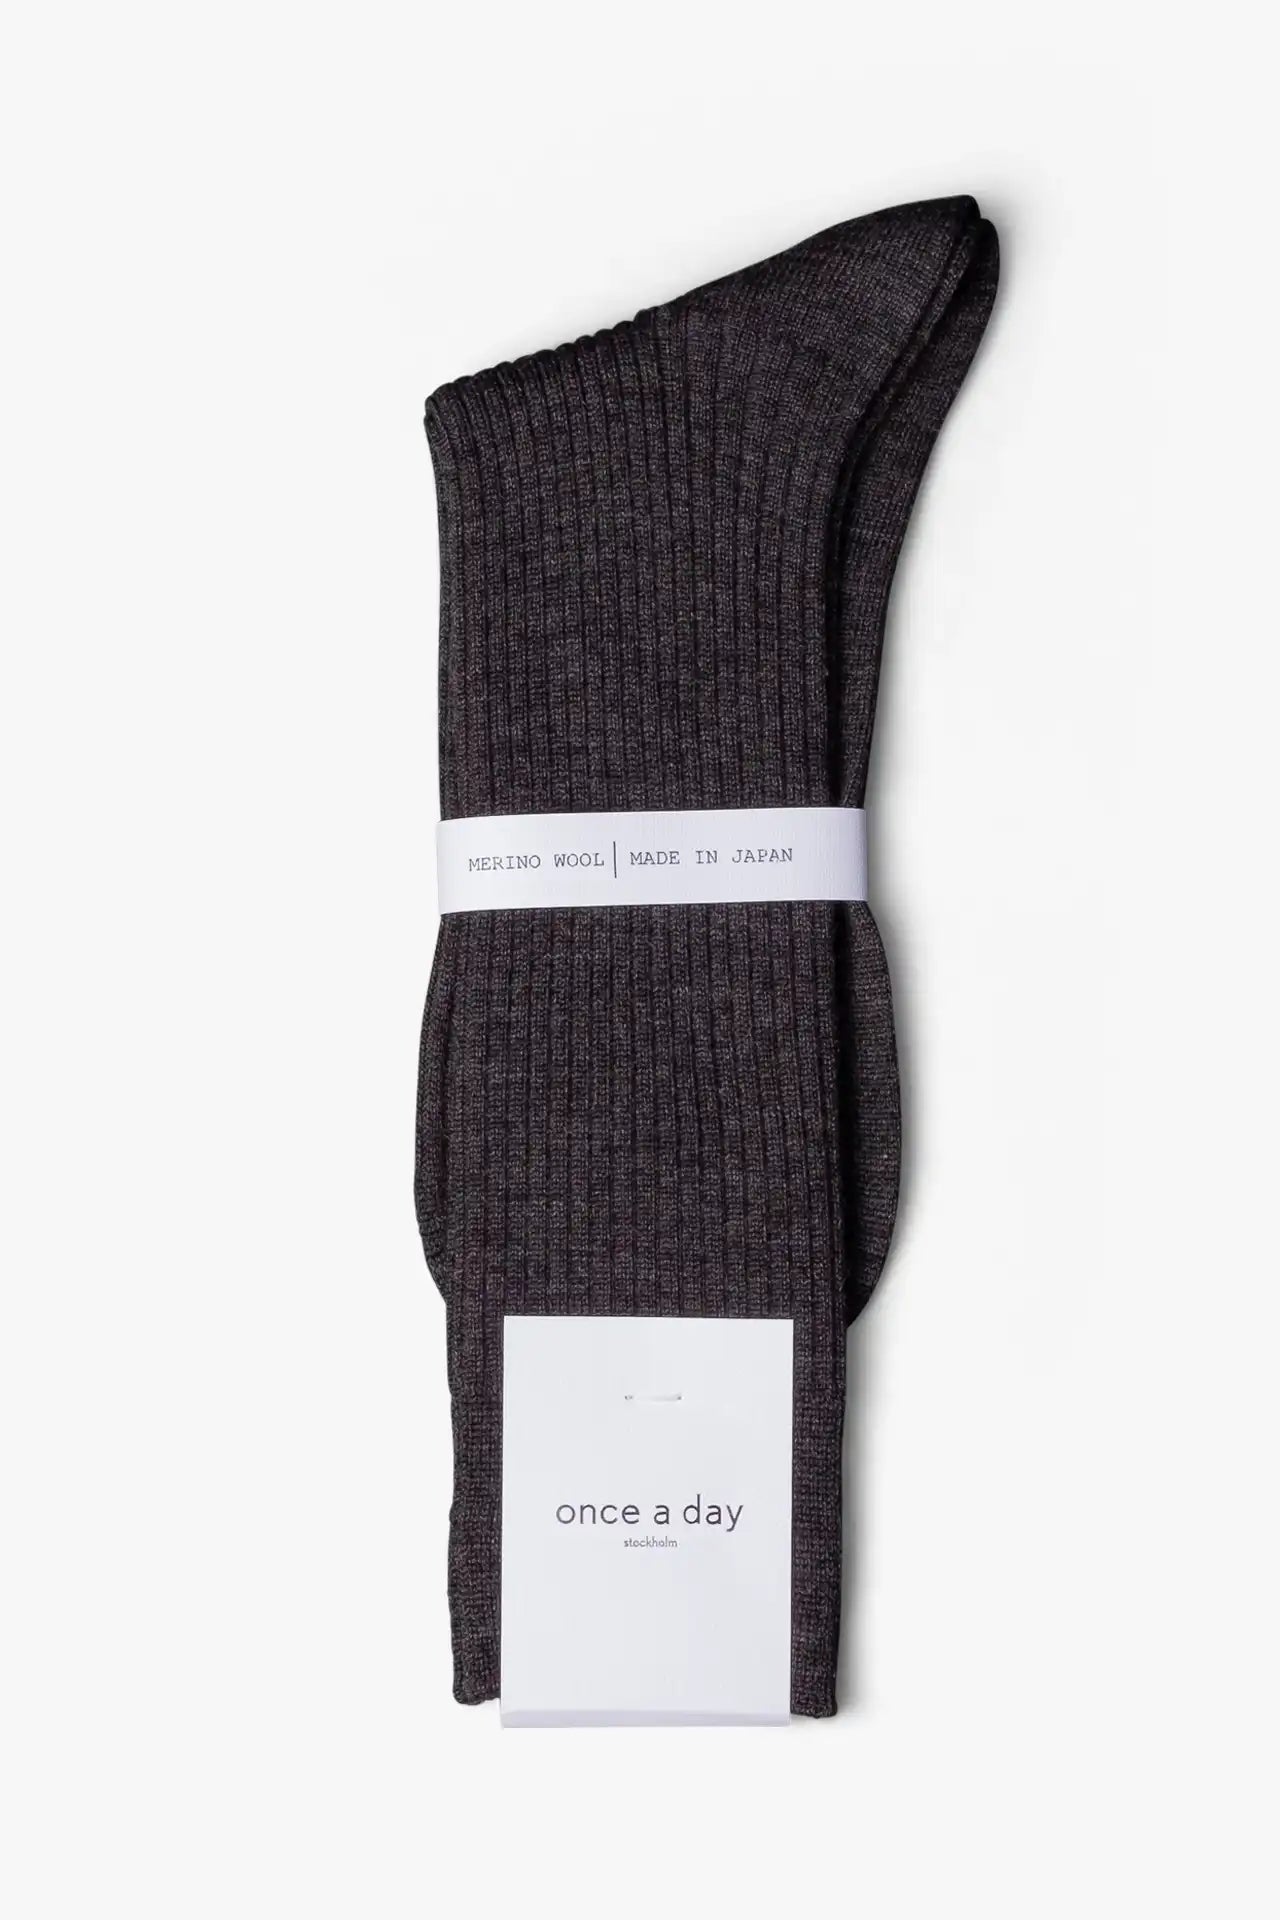 Purchase Finest Trendy Gray Dress Socks for Men - once a day